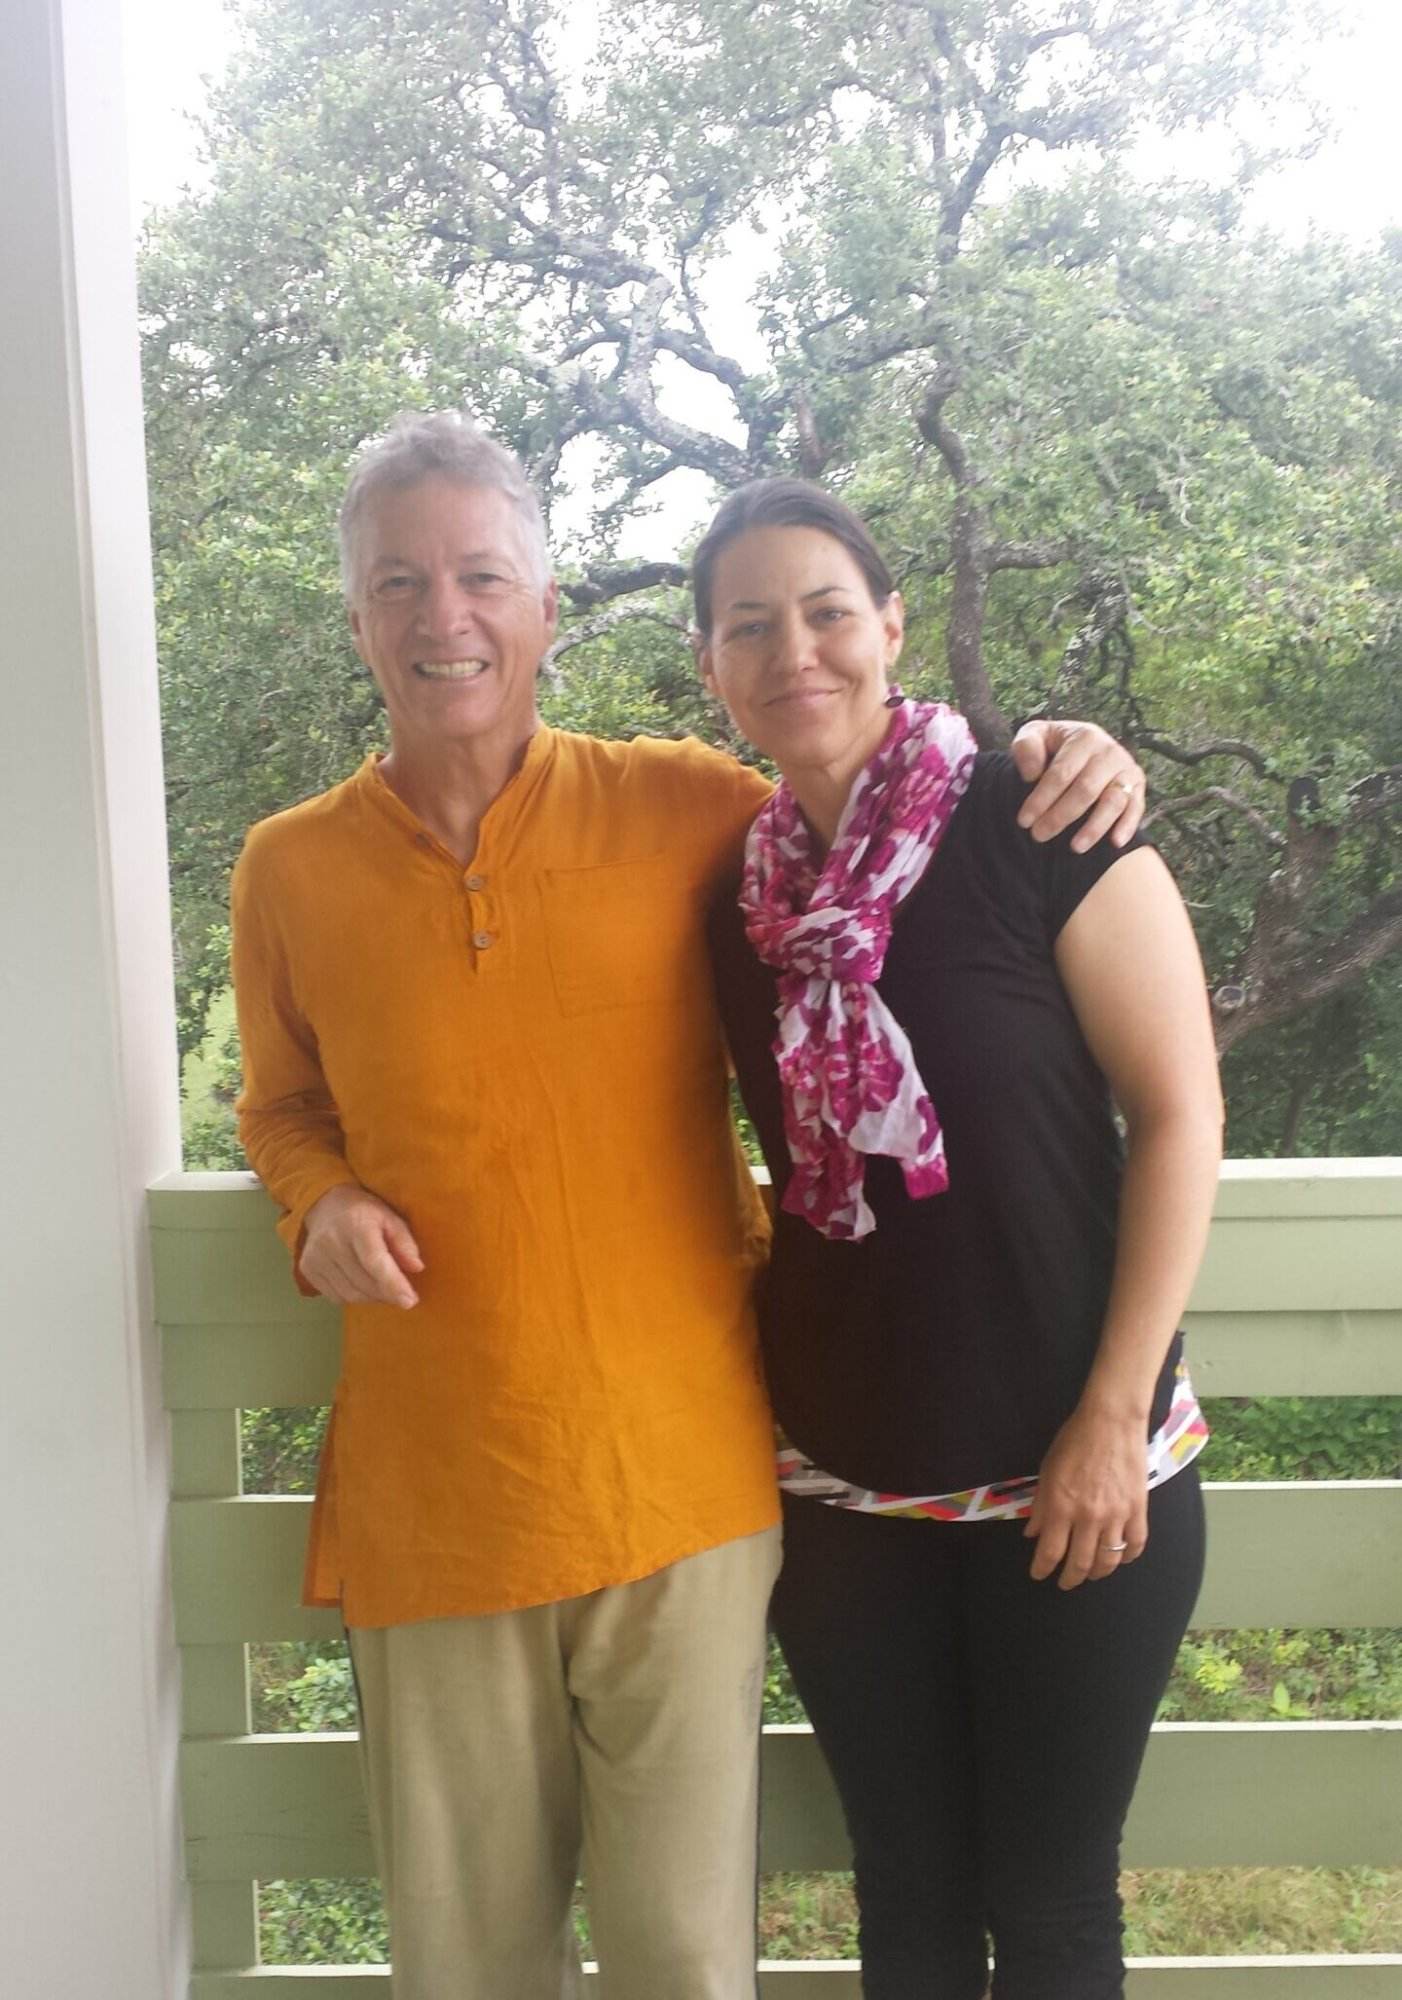 Dawn (the author) standing with her yoga teacher Joseph LePage on a second story porch with oak trees in the background. Dawn is wearing black yoga pants and top with a pink scarf. Joseph is weather tan pants and an orange button-down shirt